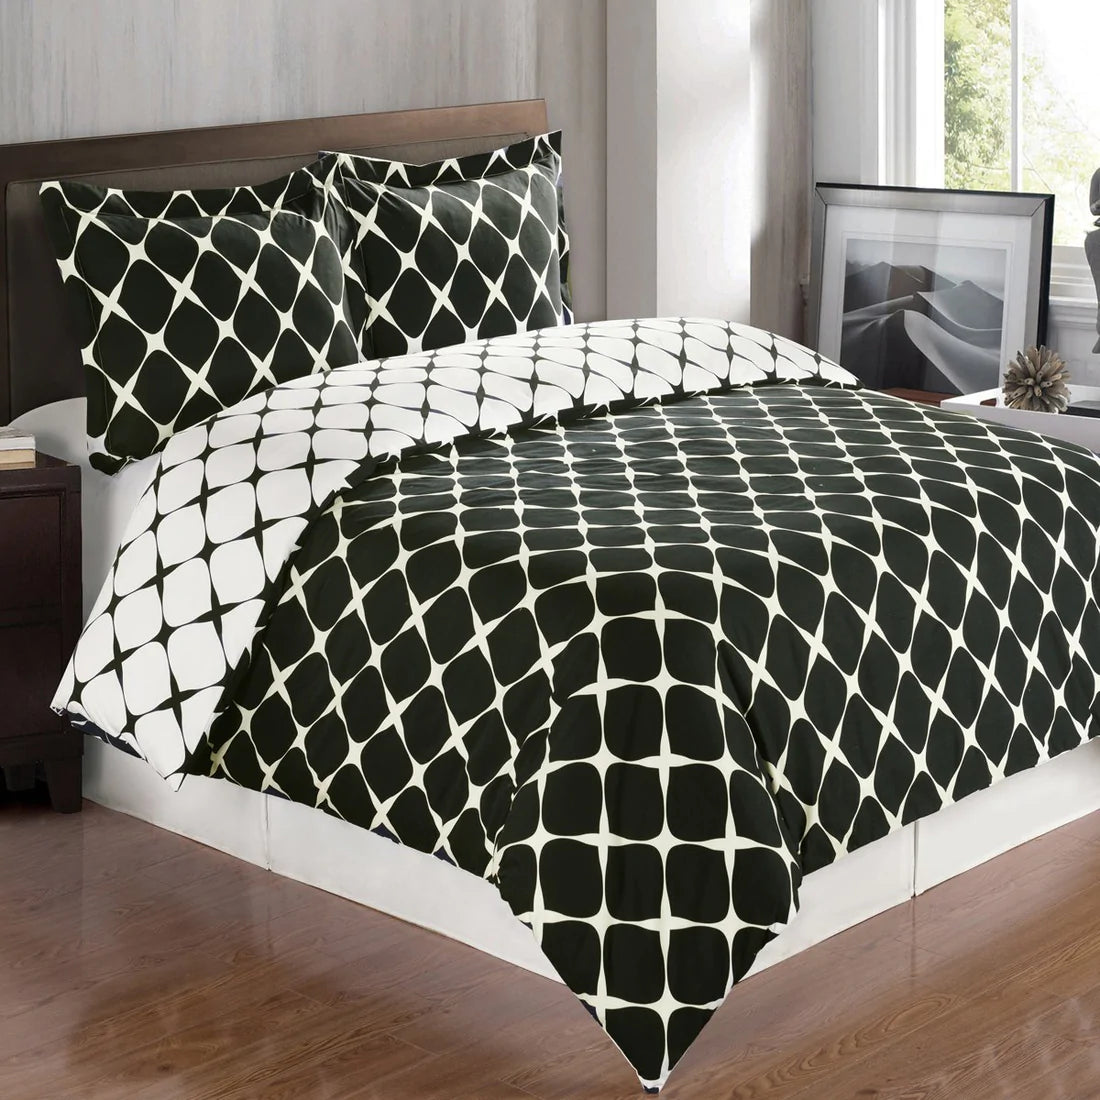 Black and White 3PC Bloomingdale Duvet Covers and Sheet Set